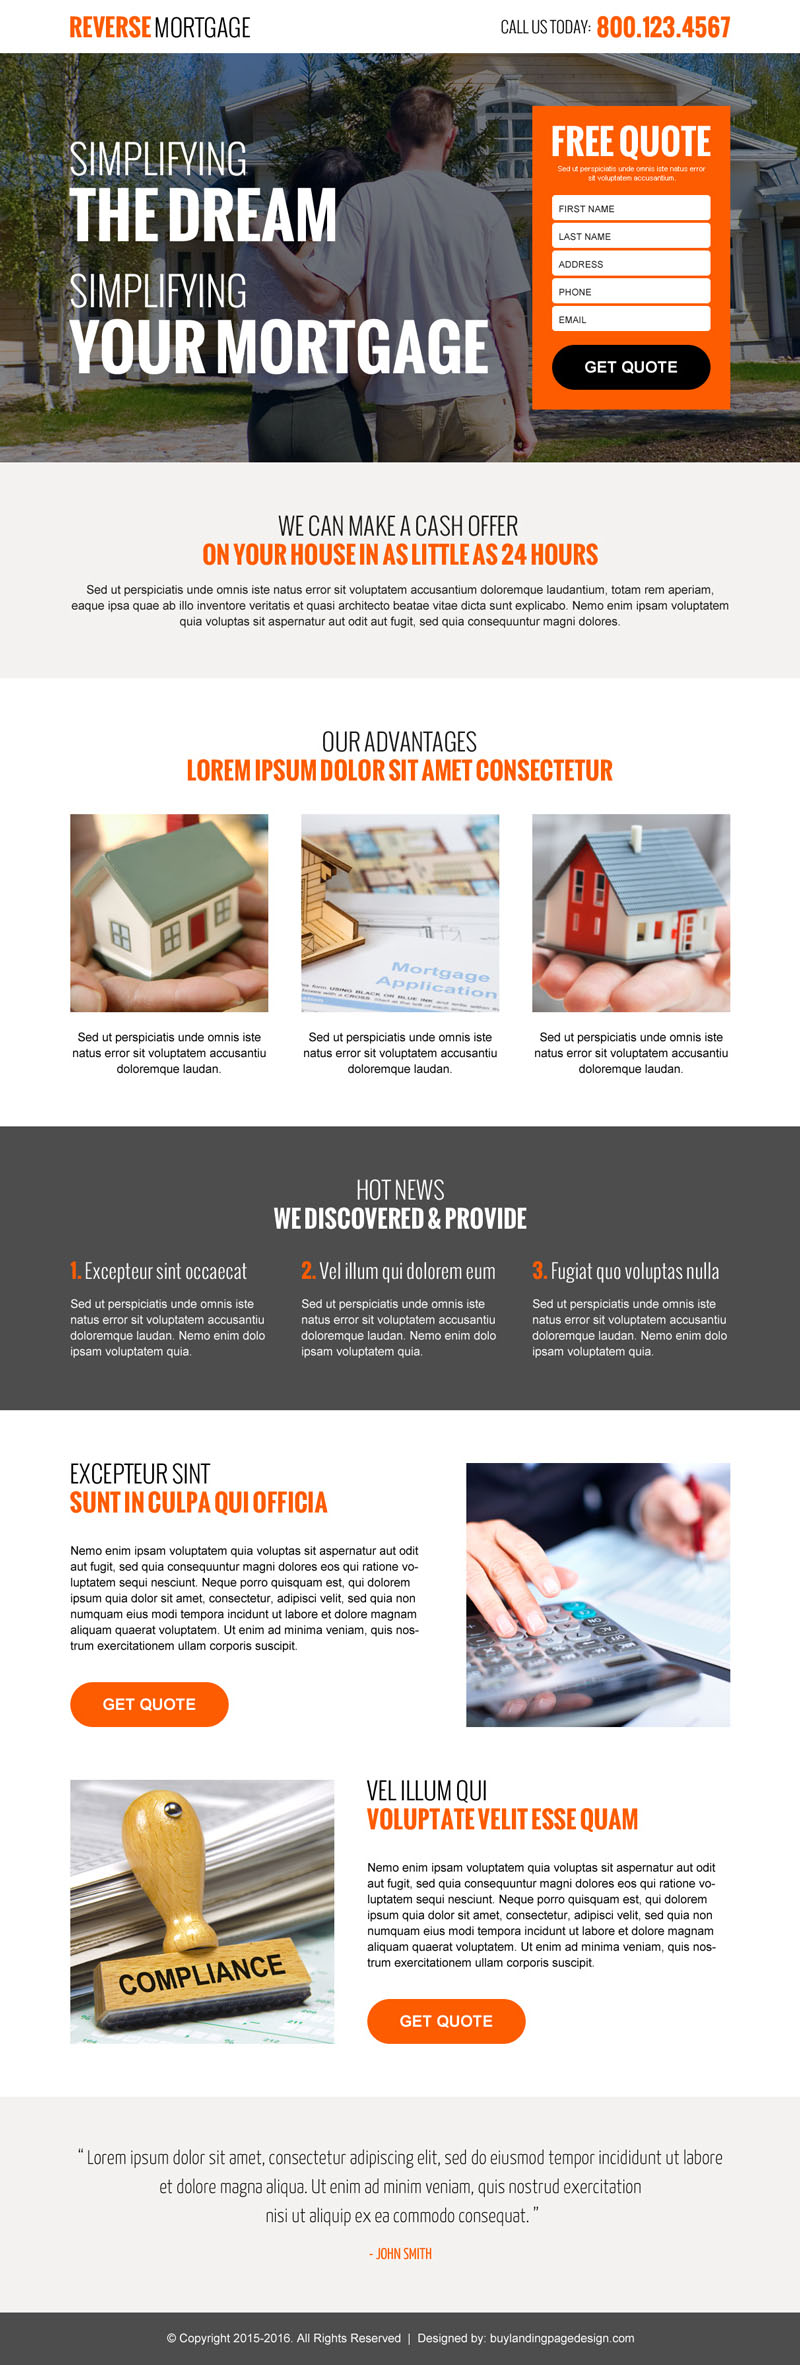 reverse-mortgage-free-quote-lead-gen-converting-landing-page-design-014